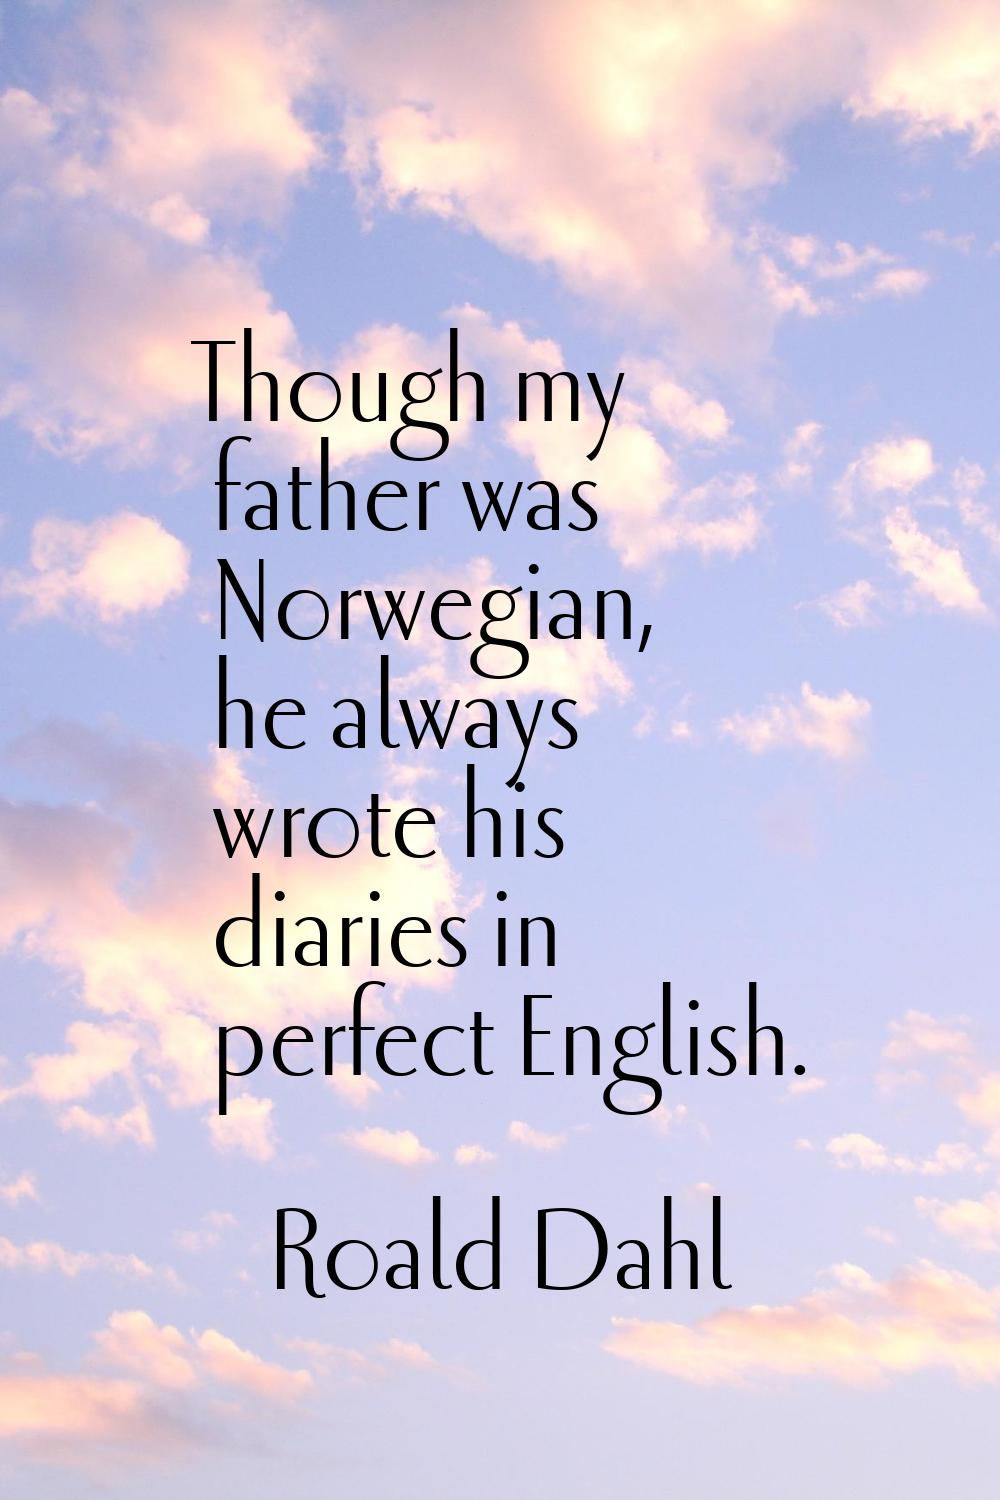 Though my father was Norwegian, he always wrote his diaries in perfect English.